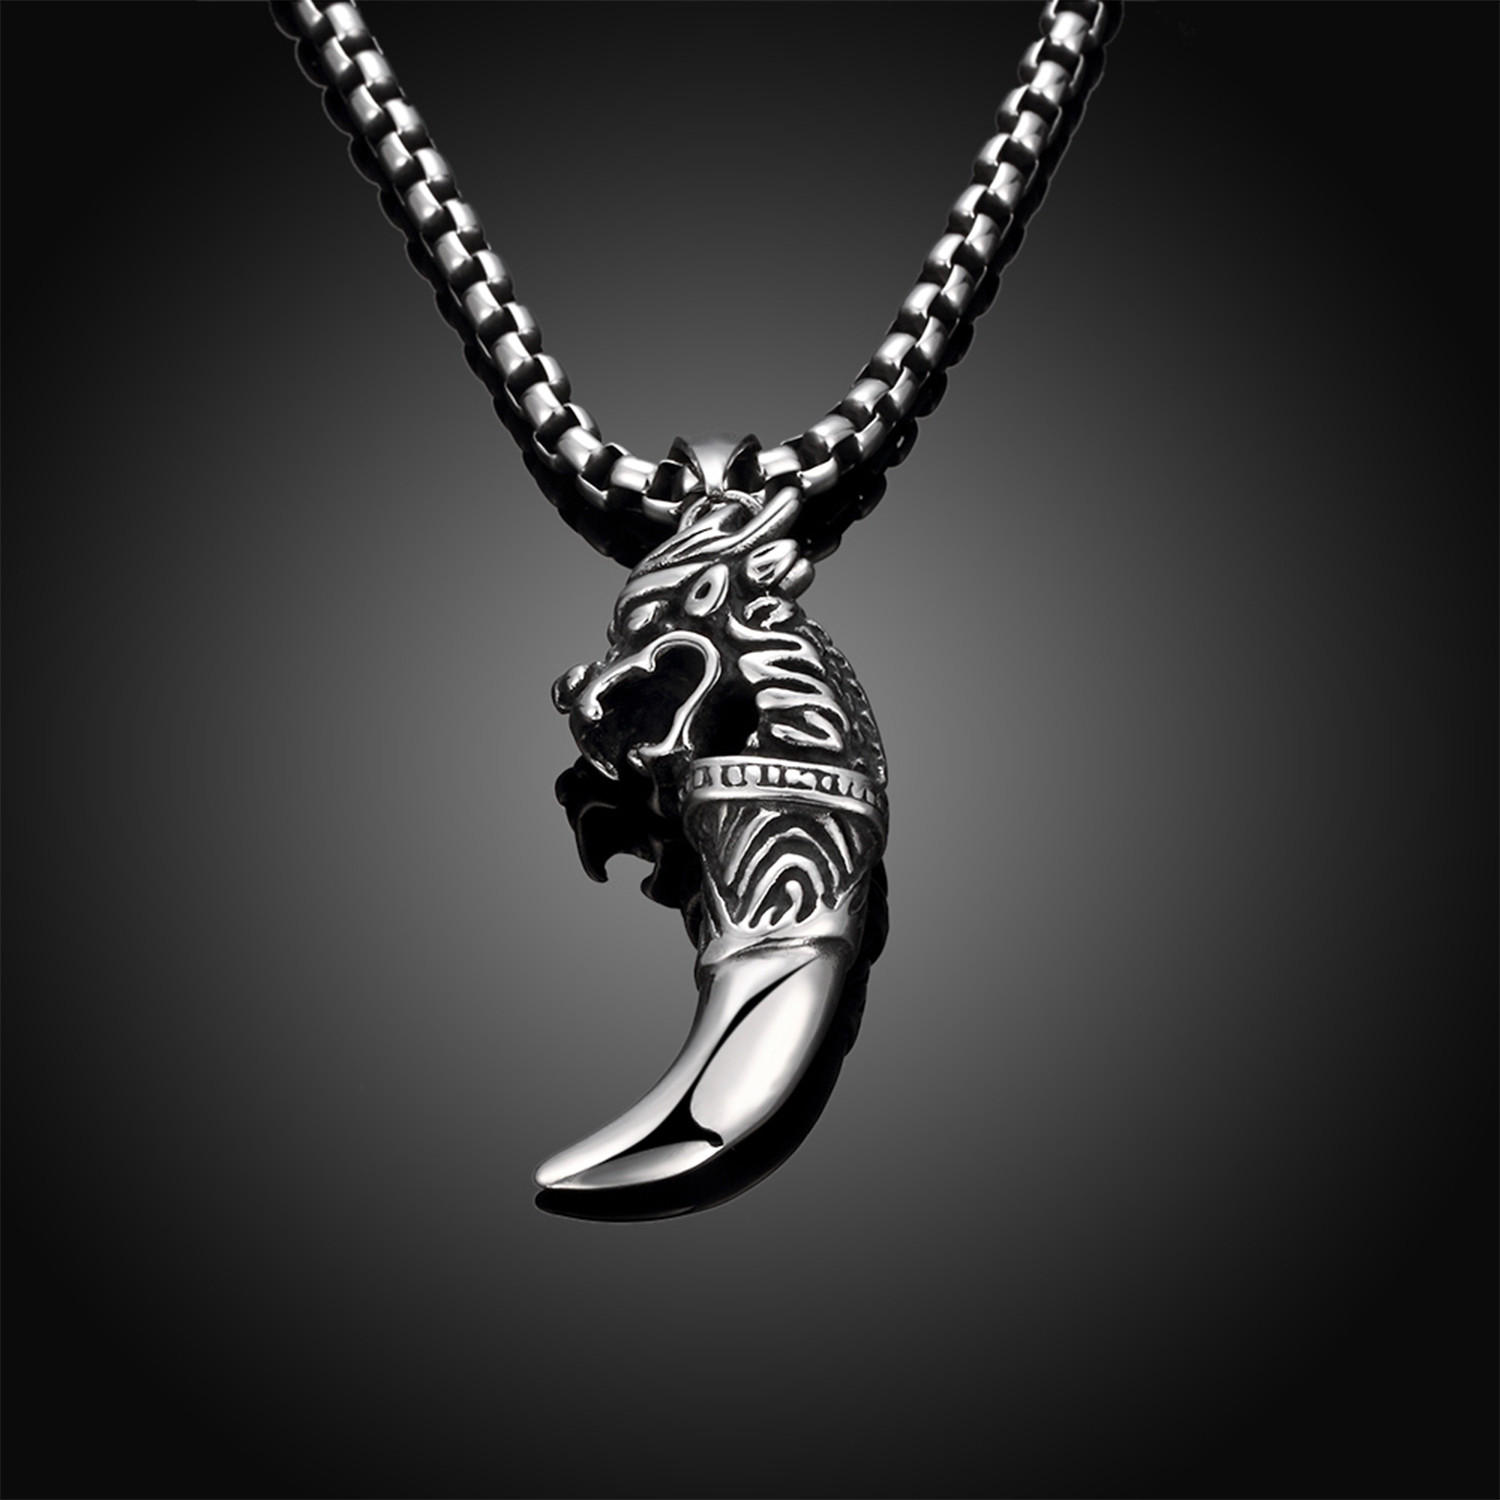 Stainless Steel Saber Tooth Pendant Necklace // Silver - Rubique ...